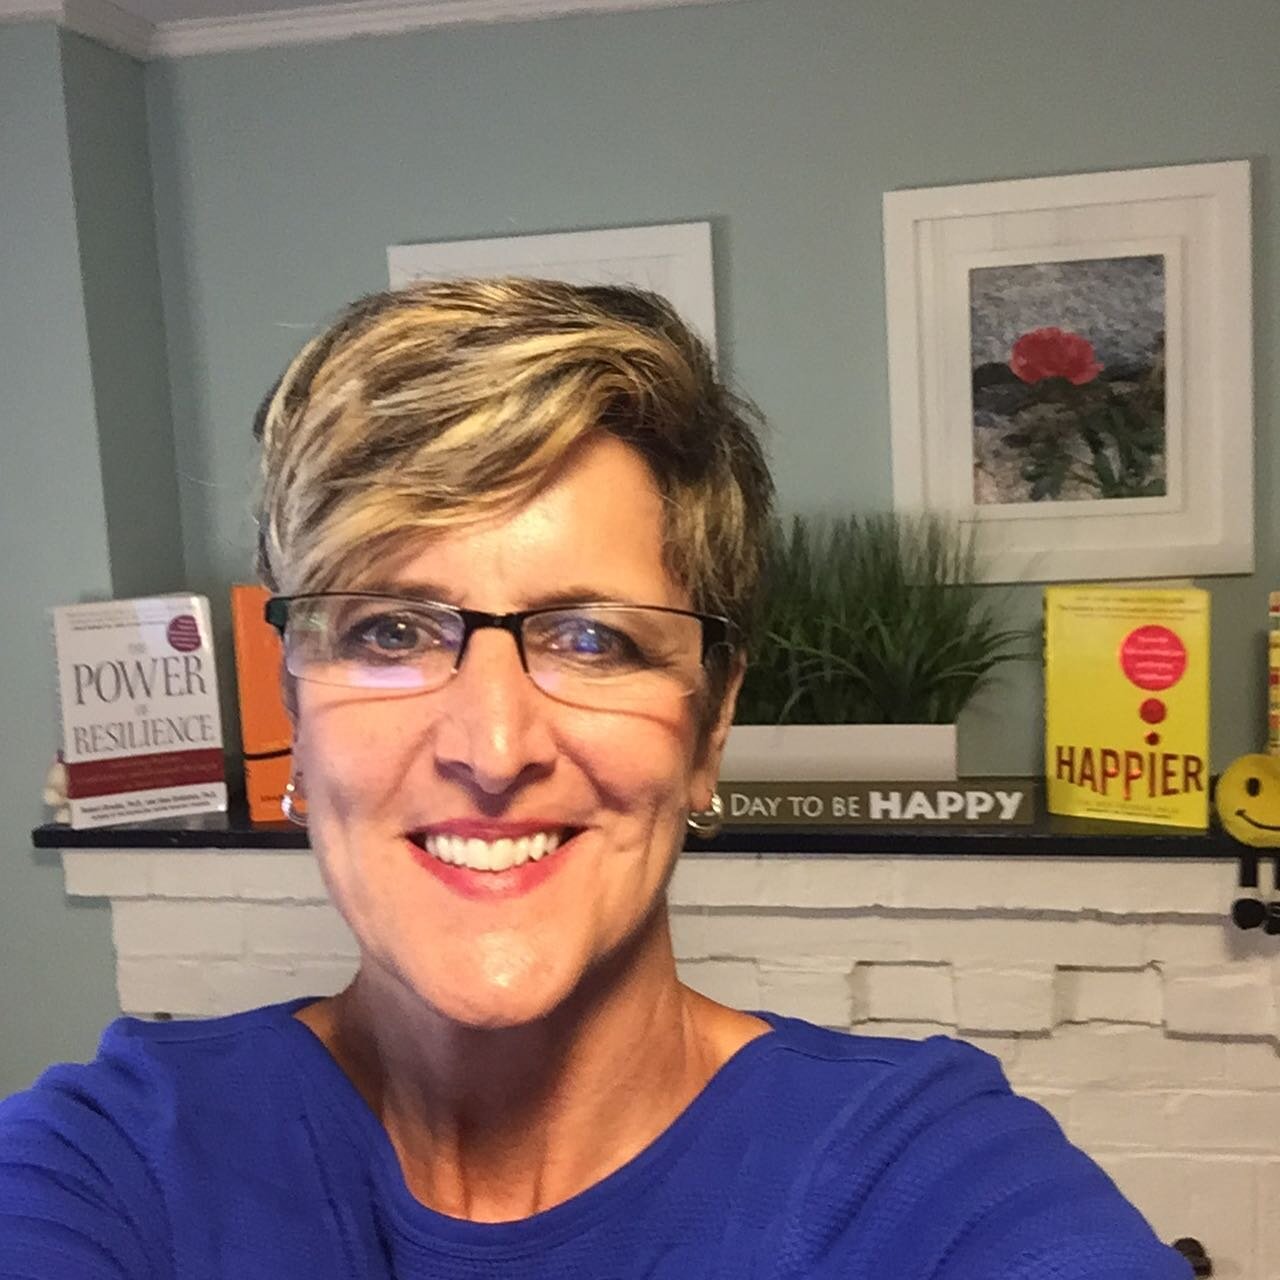 Live from my home studio! I&rsquo;m so happy to be back in the schools albeit virtually to help folks feel happier, less stressed and more resilient! Teachers and school staff rock!!! #seec#westportschools#uxbridgeschools#Mindfulness#positivepsycholo